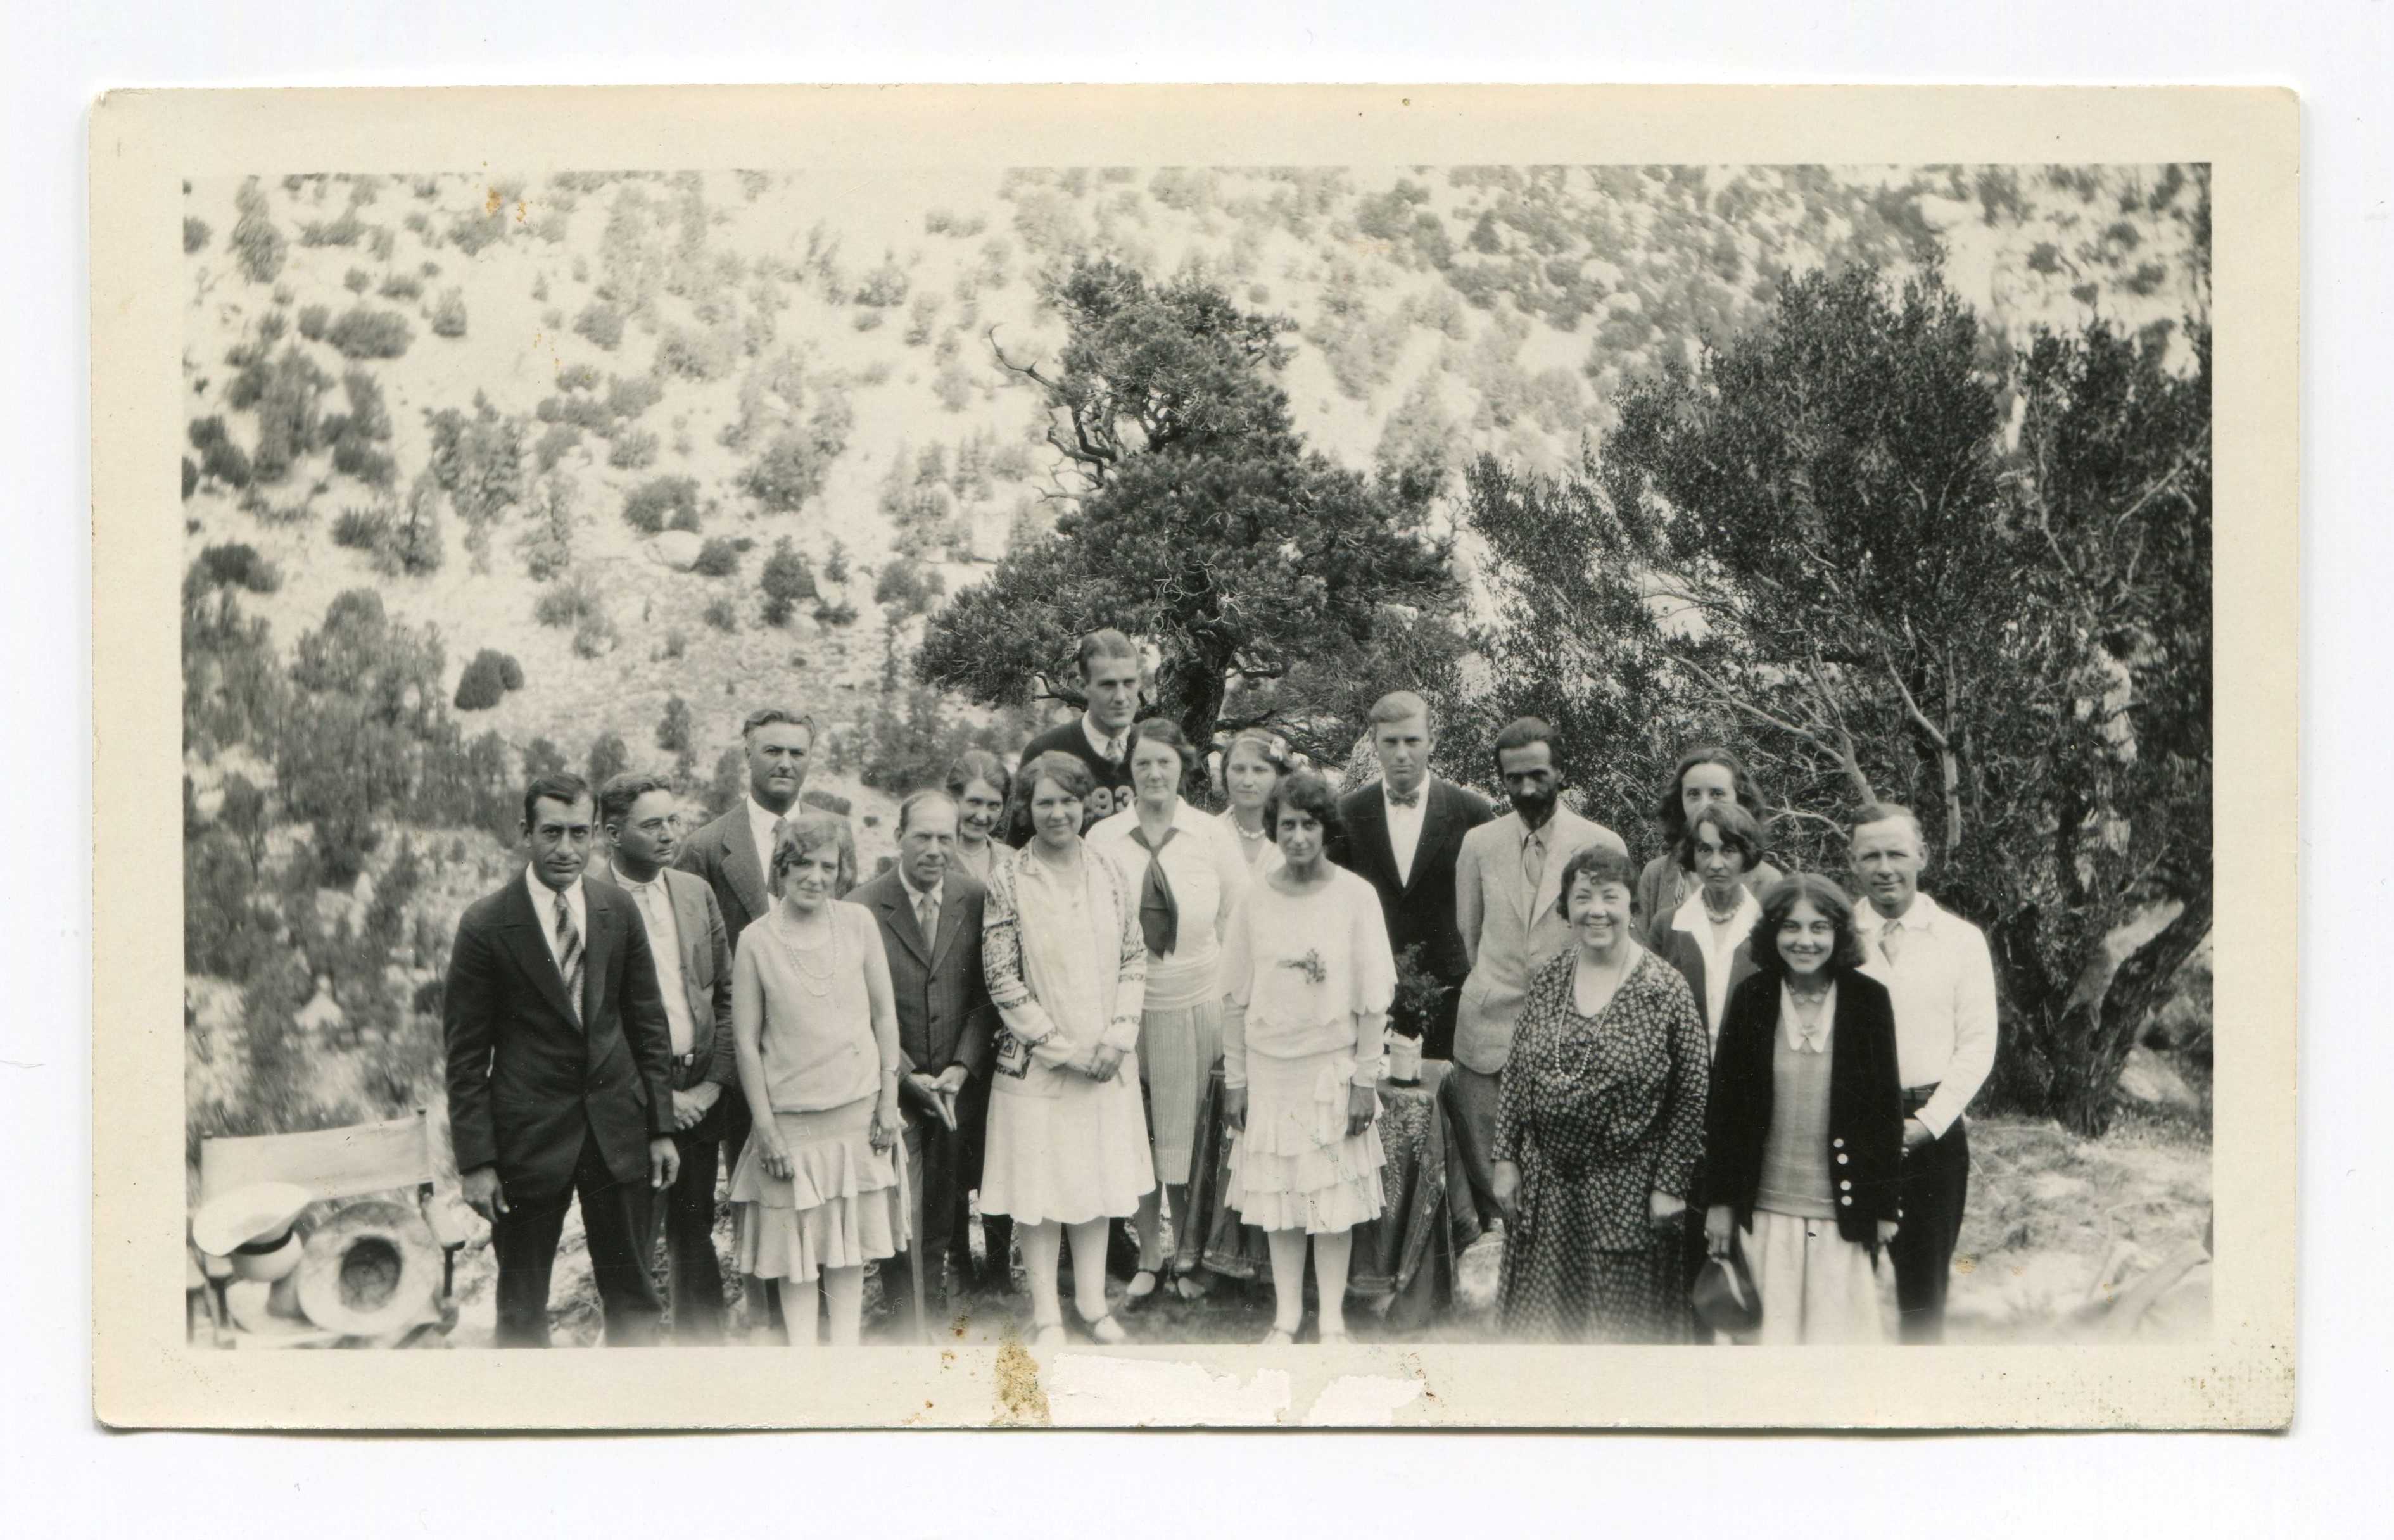 1930 Convention - group photo